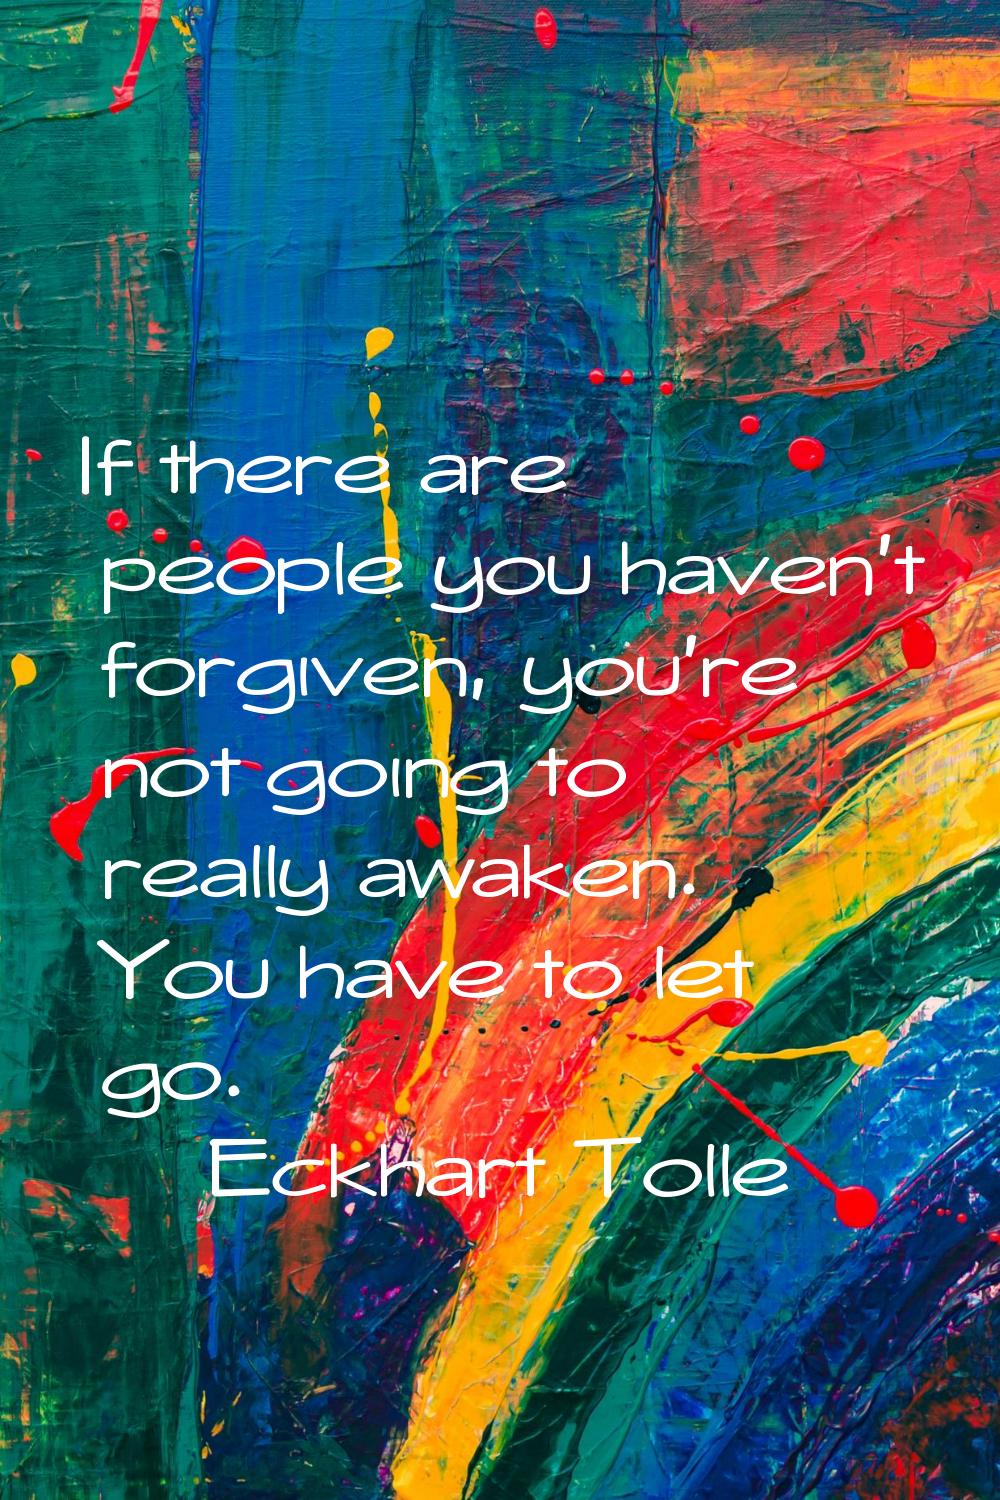 If there are people you haven't forgiven, you're not going to really awaken. You have to let go.